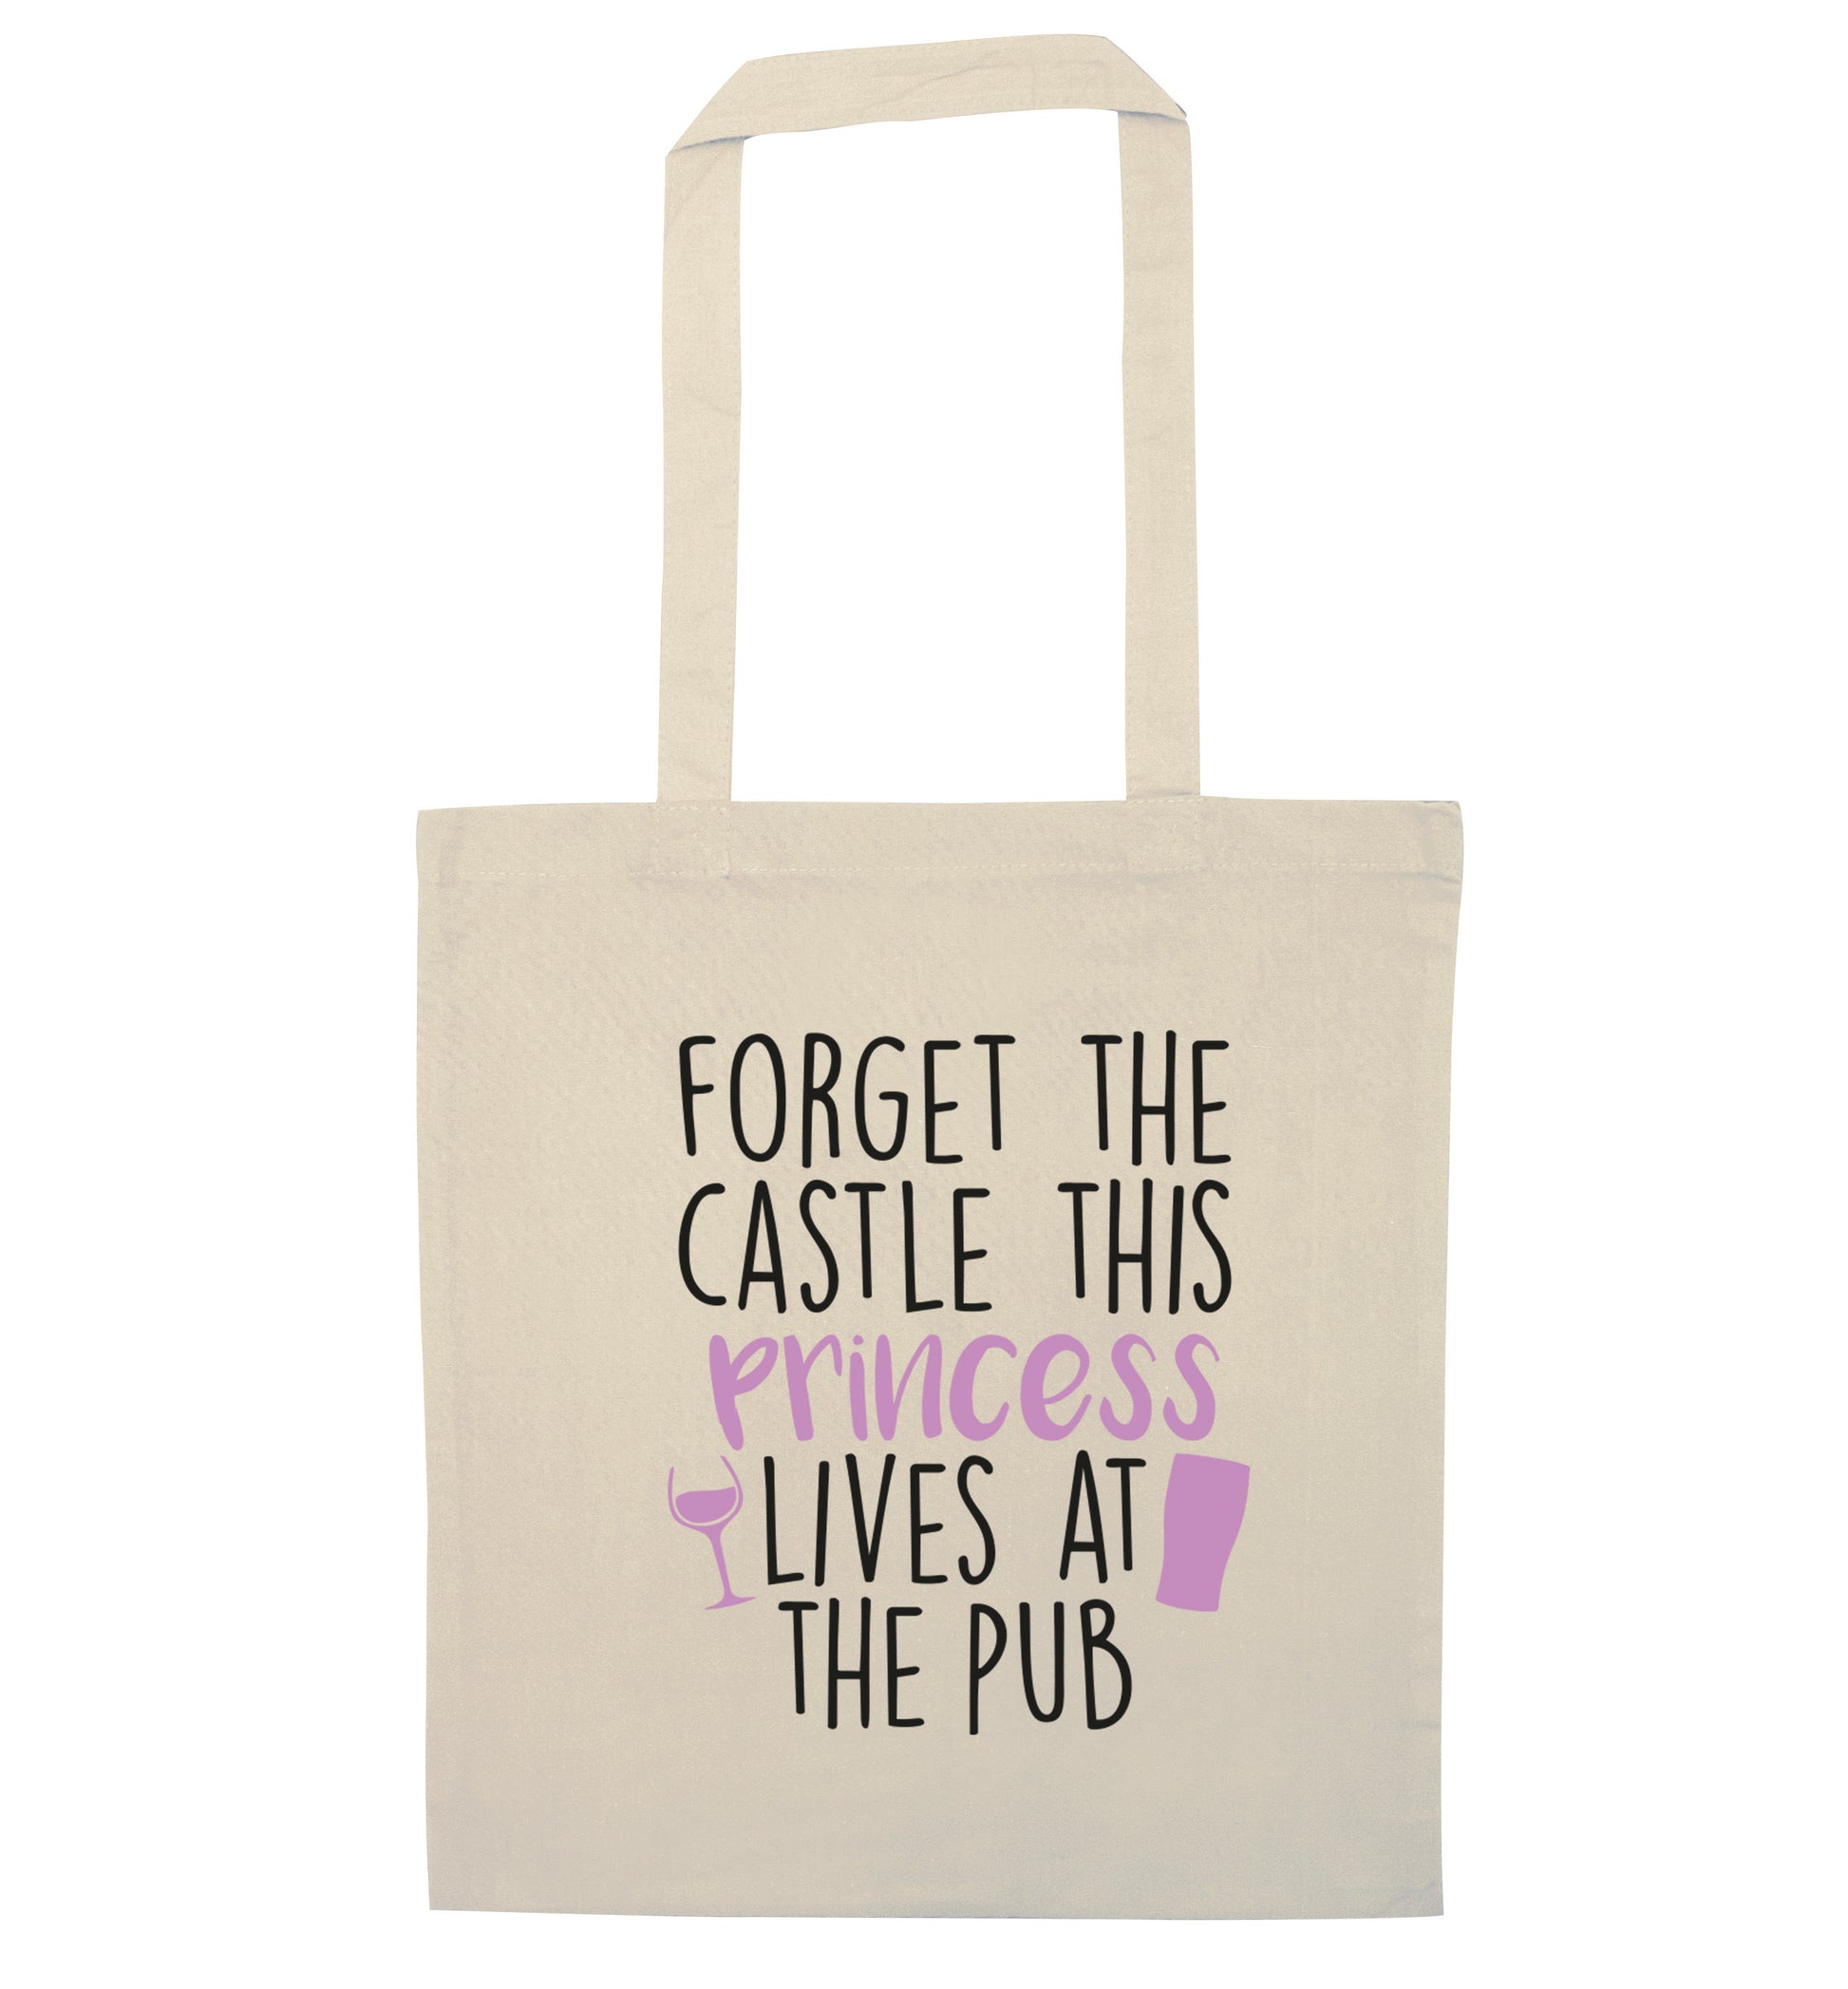 Forget the castle this princess lives at the pub natural tote bag